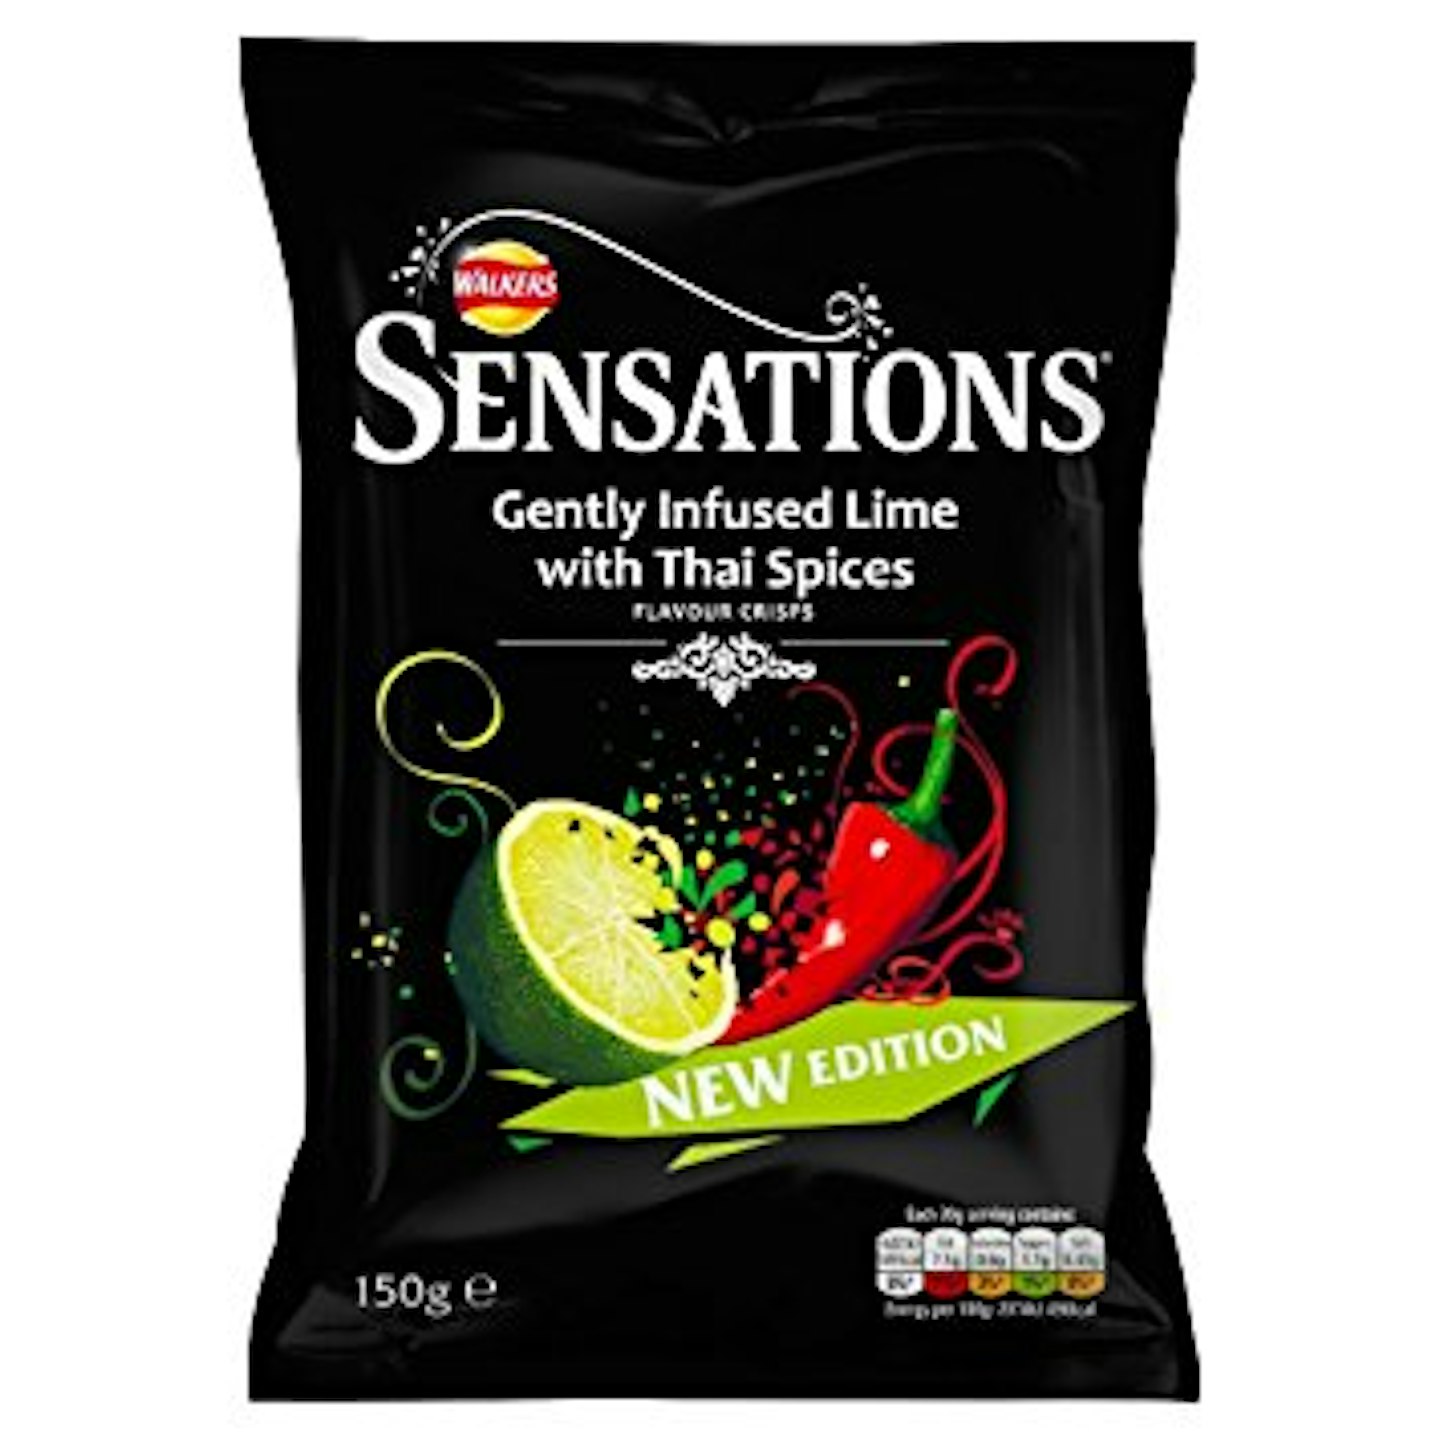 Discontinued crisps Walkers Sensations Gently Infused Lime with Thai Spices